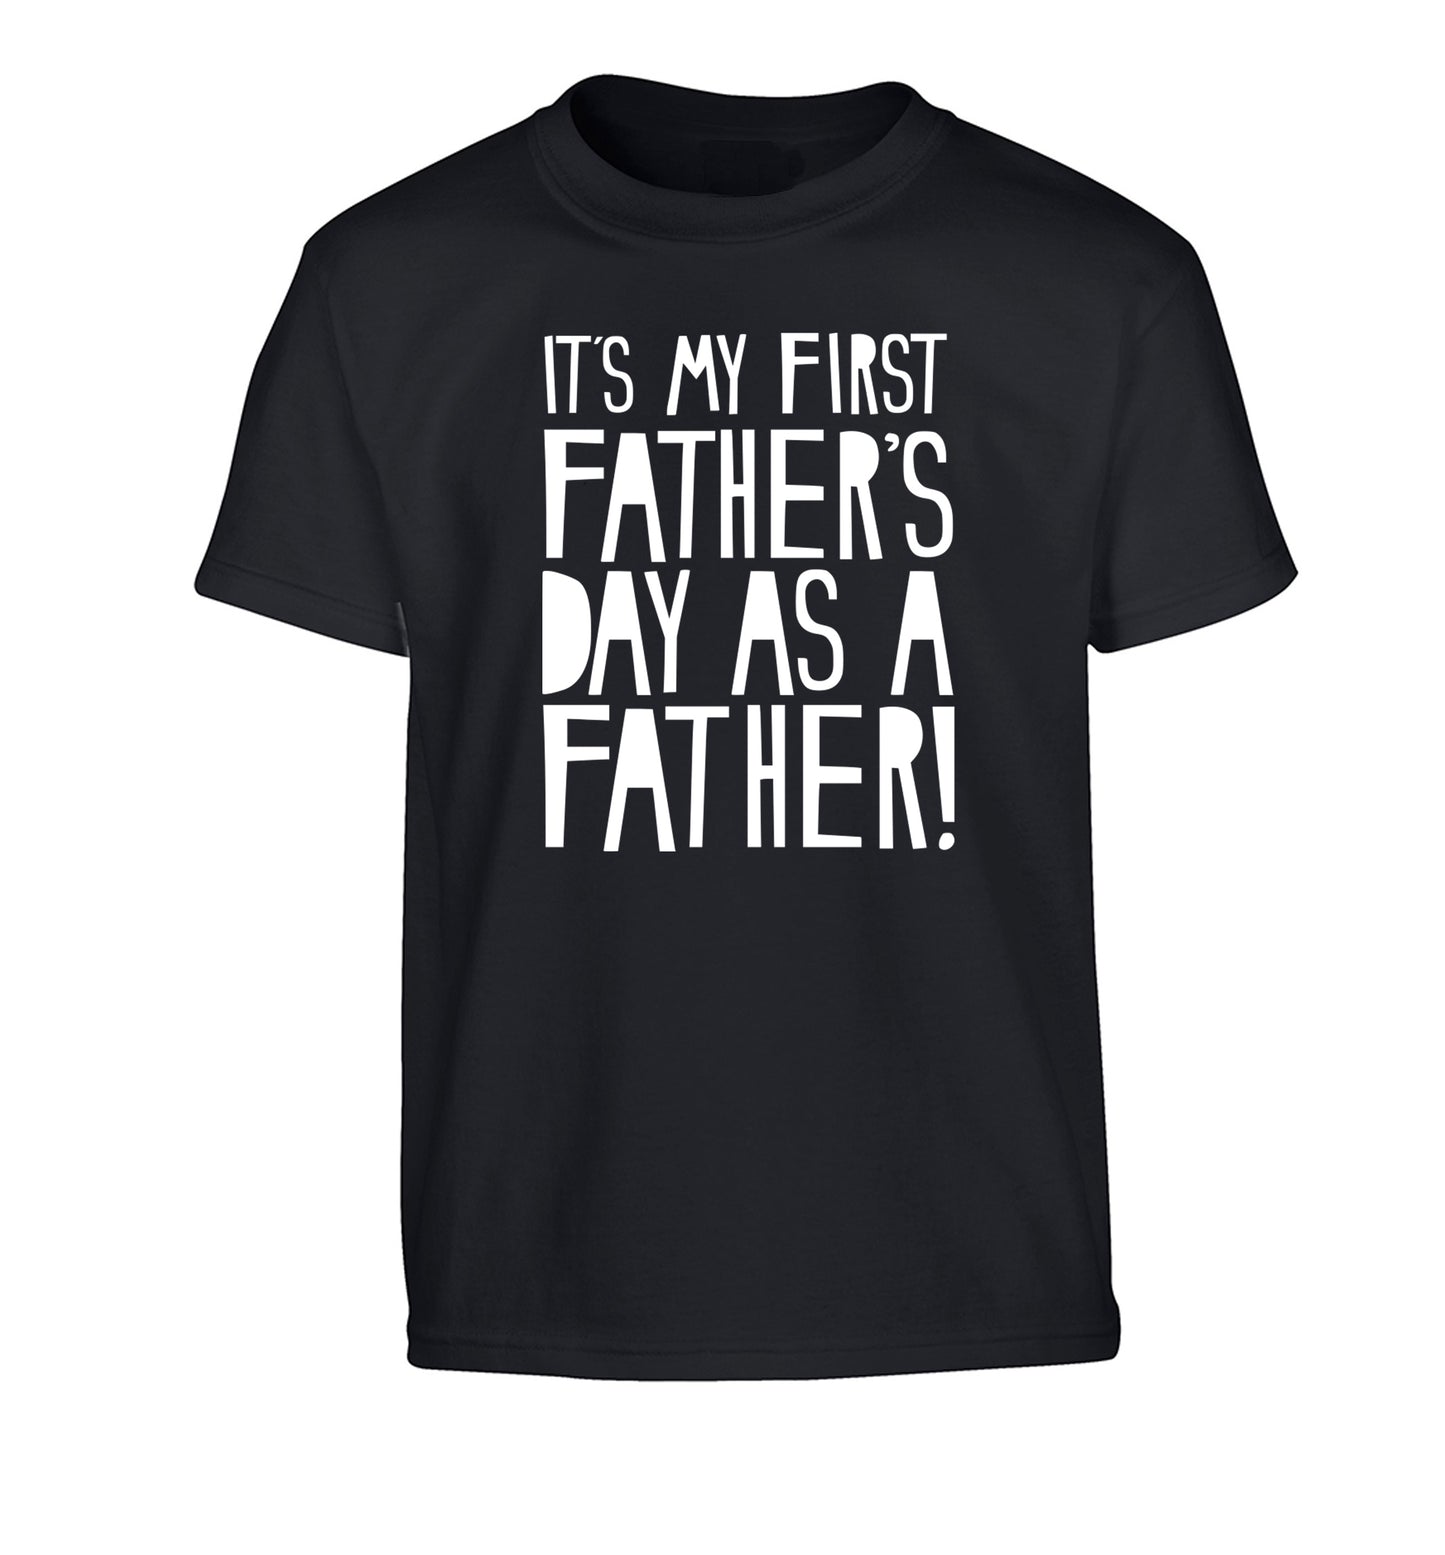 It's my first Father's Day as a father! Children's black Tshirt 12-13 Years